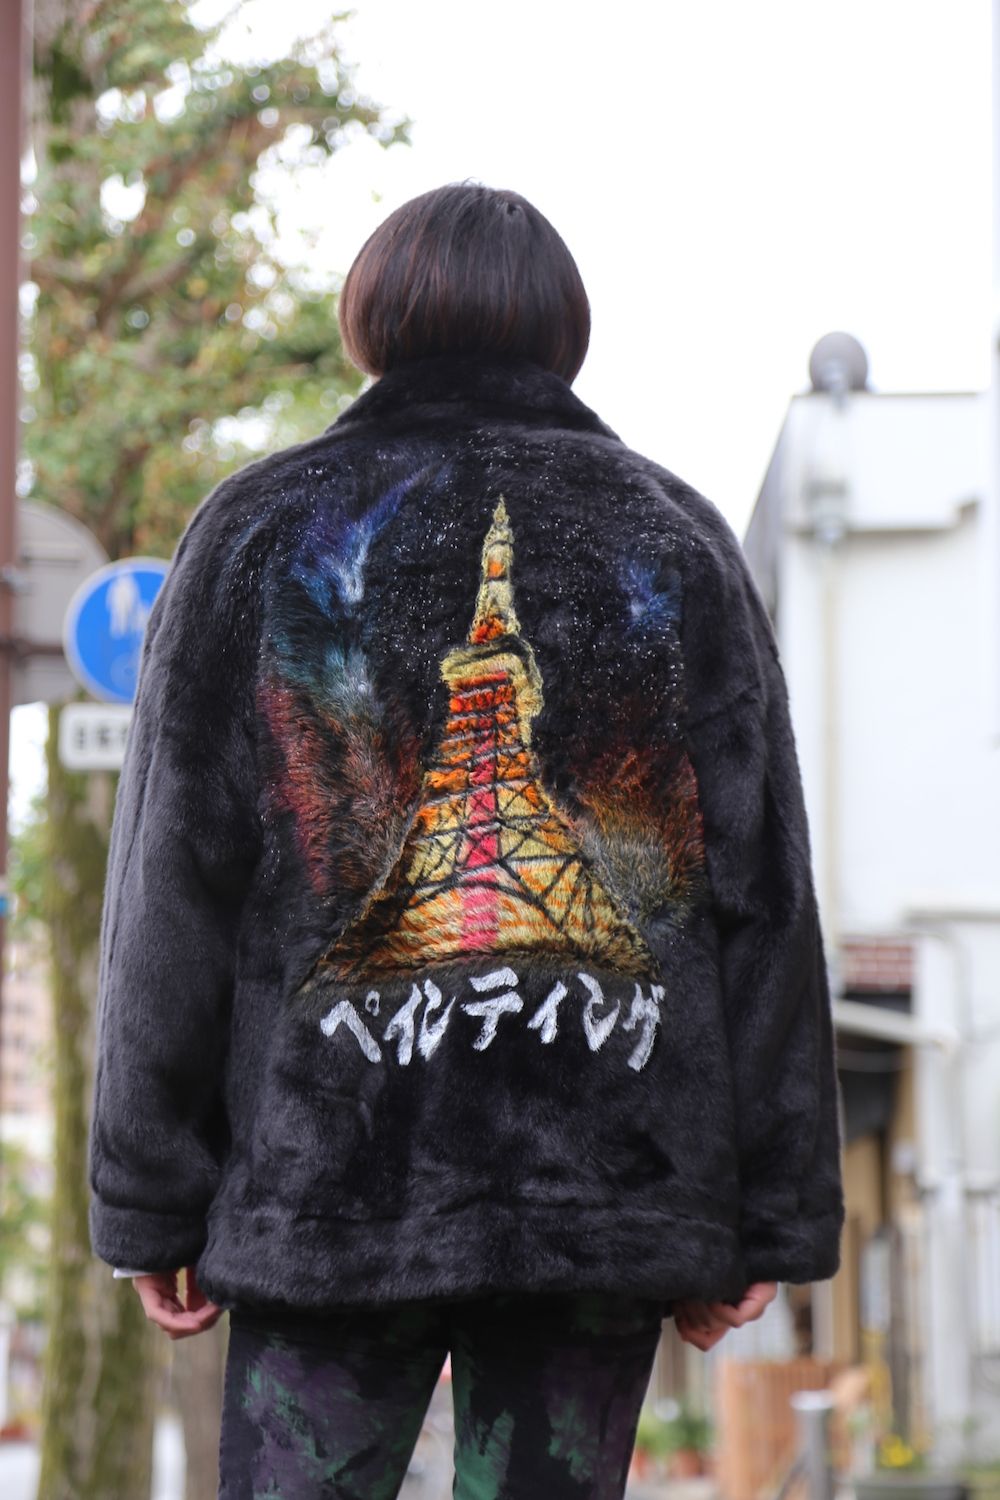 doublet 19AW HAND PAINTED FUR JACKETジャケット・アウター